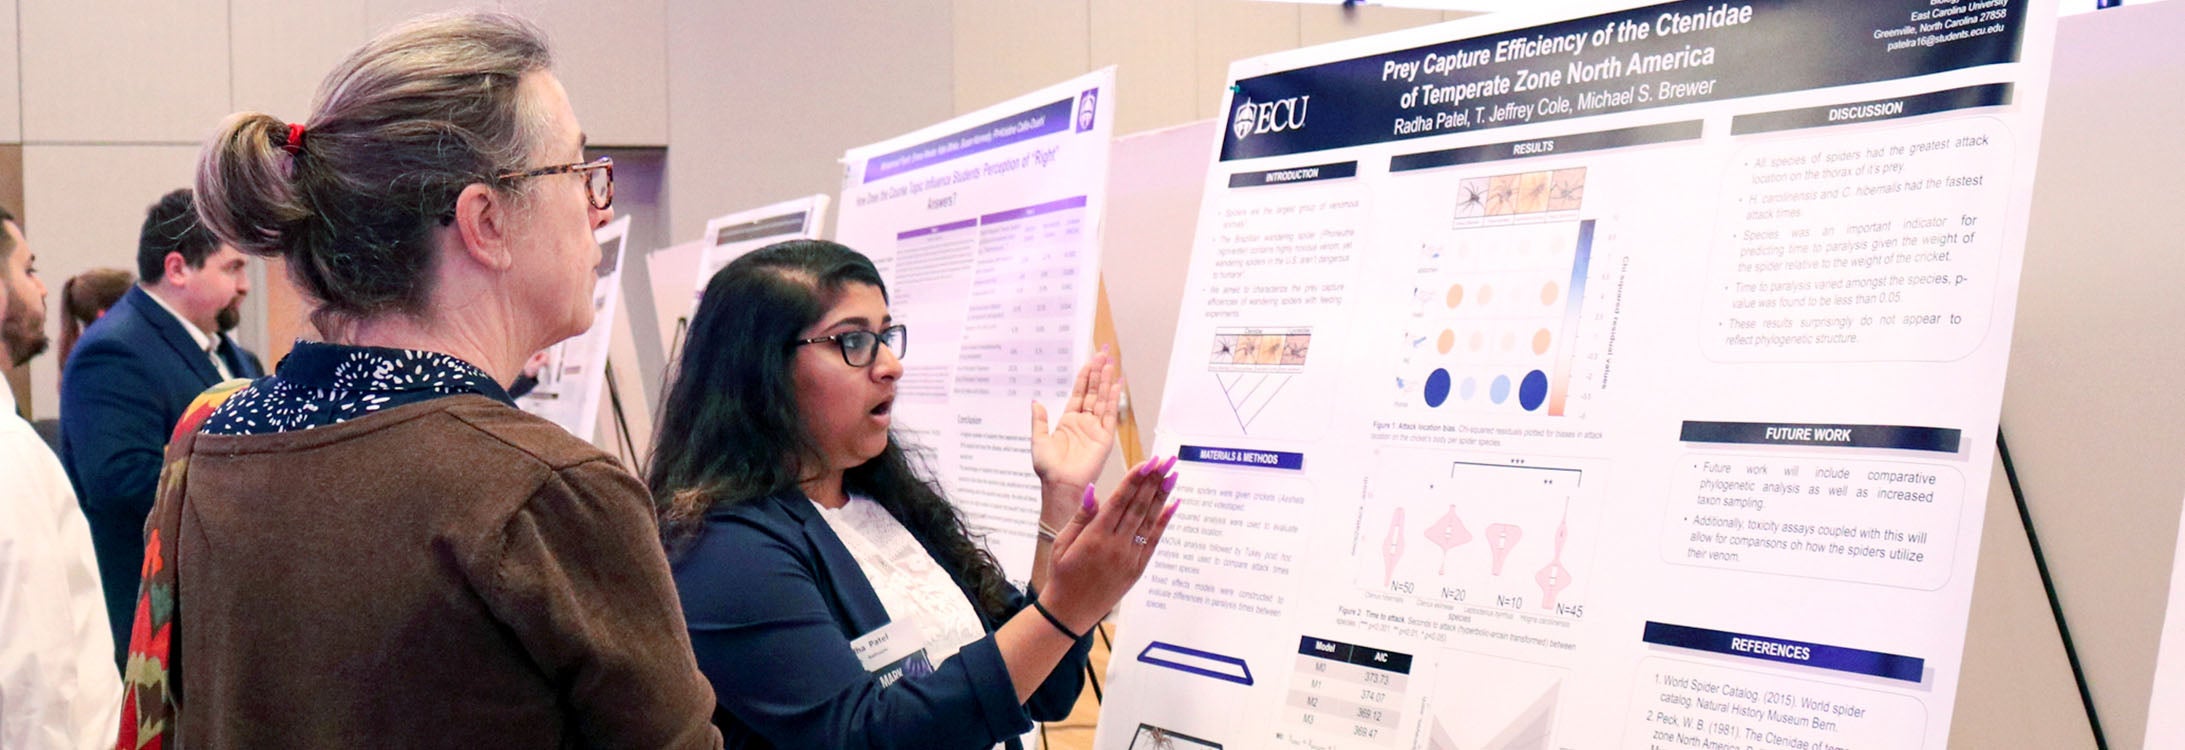 Undergraduate researcher Radha Patel shares her work with a judge at East Carolina University’s 13th annual Research and Creative Achievement Week. A record number of undergraduate students presented at this year’s event. (Photo by Matt Smith)